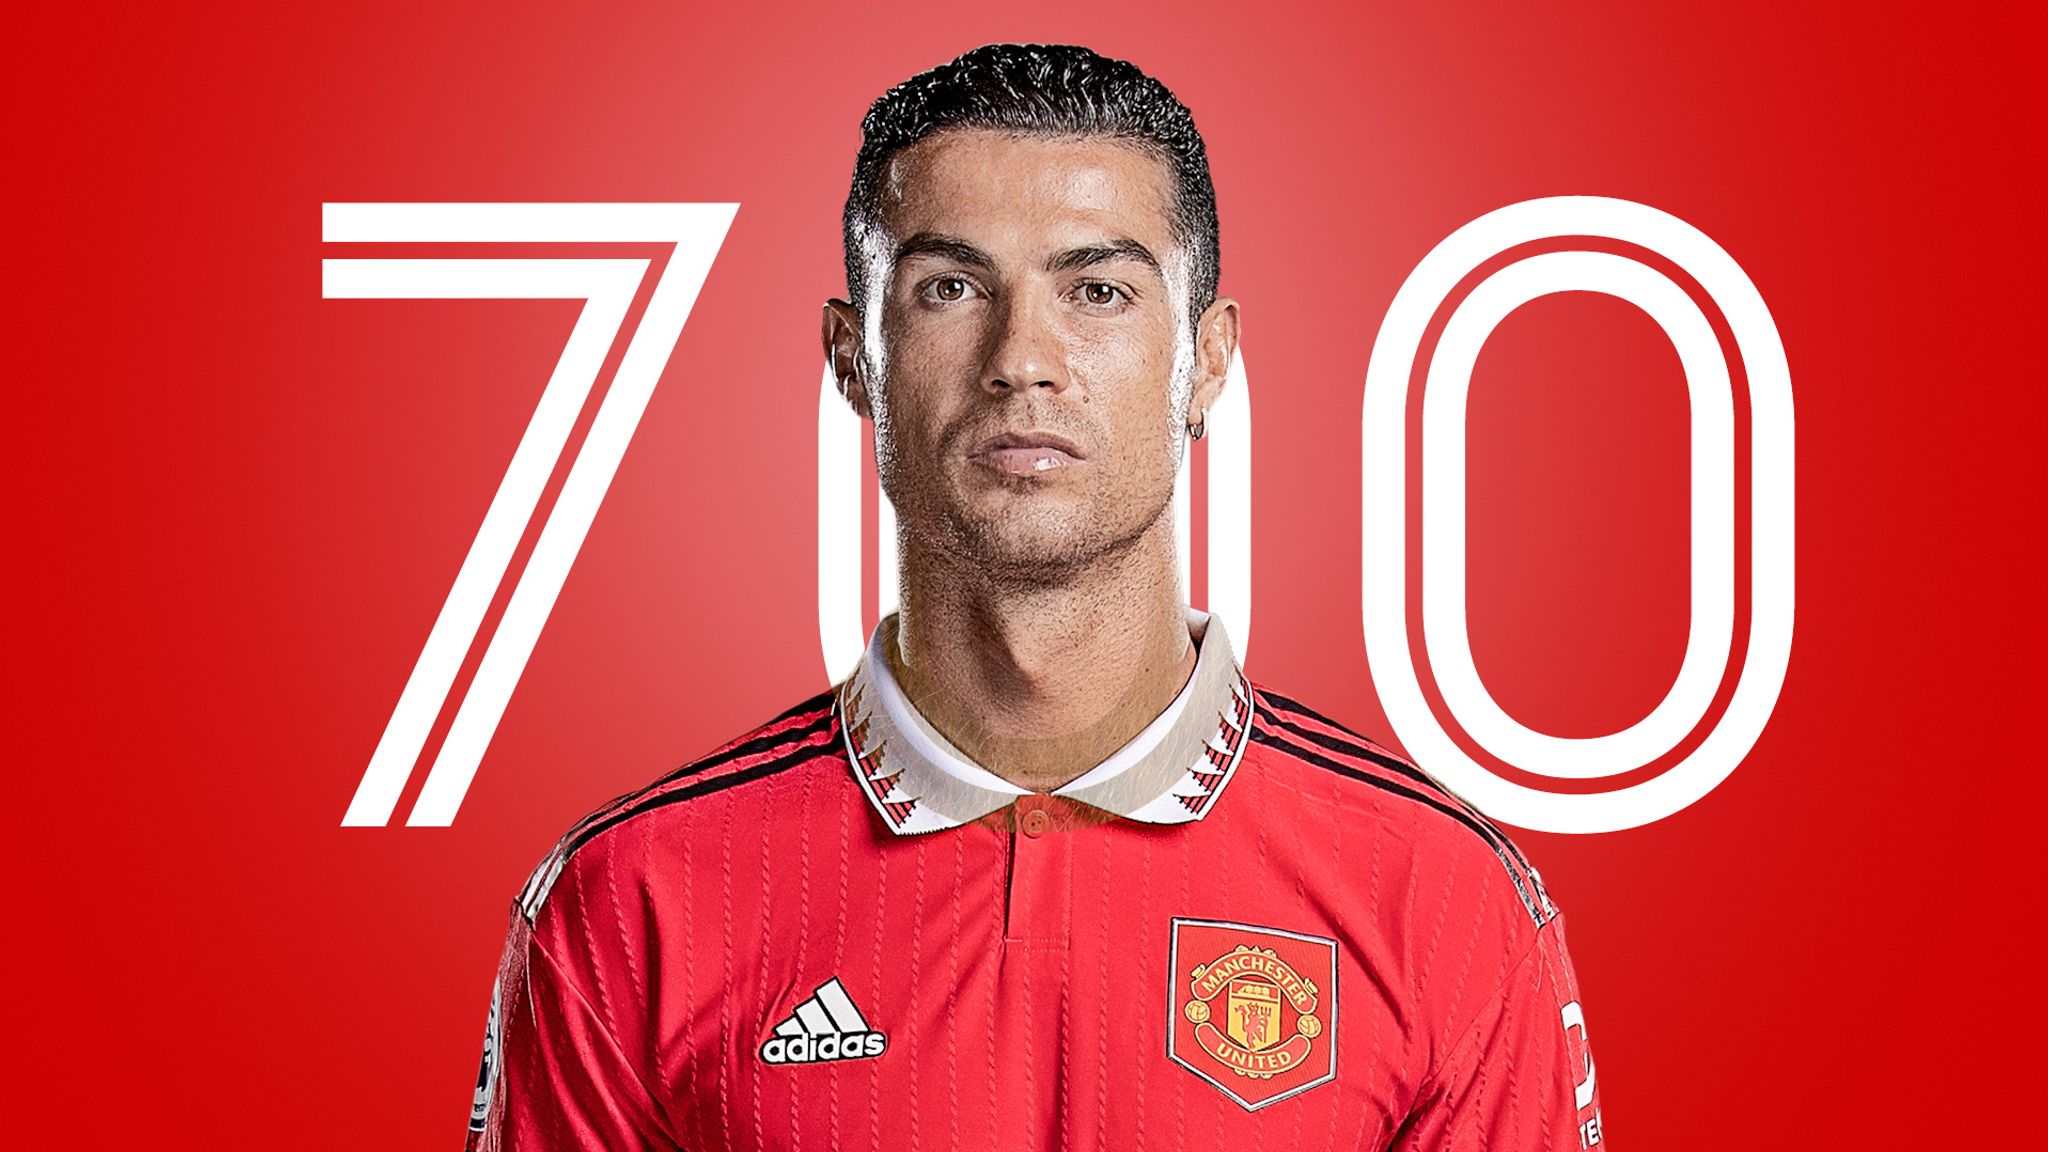 Cristiano 700 club goals: How forward scored his record haul for Man Utd, Real Madrid, Juventus and Sporting | Football News | Sky Sports